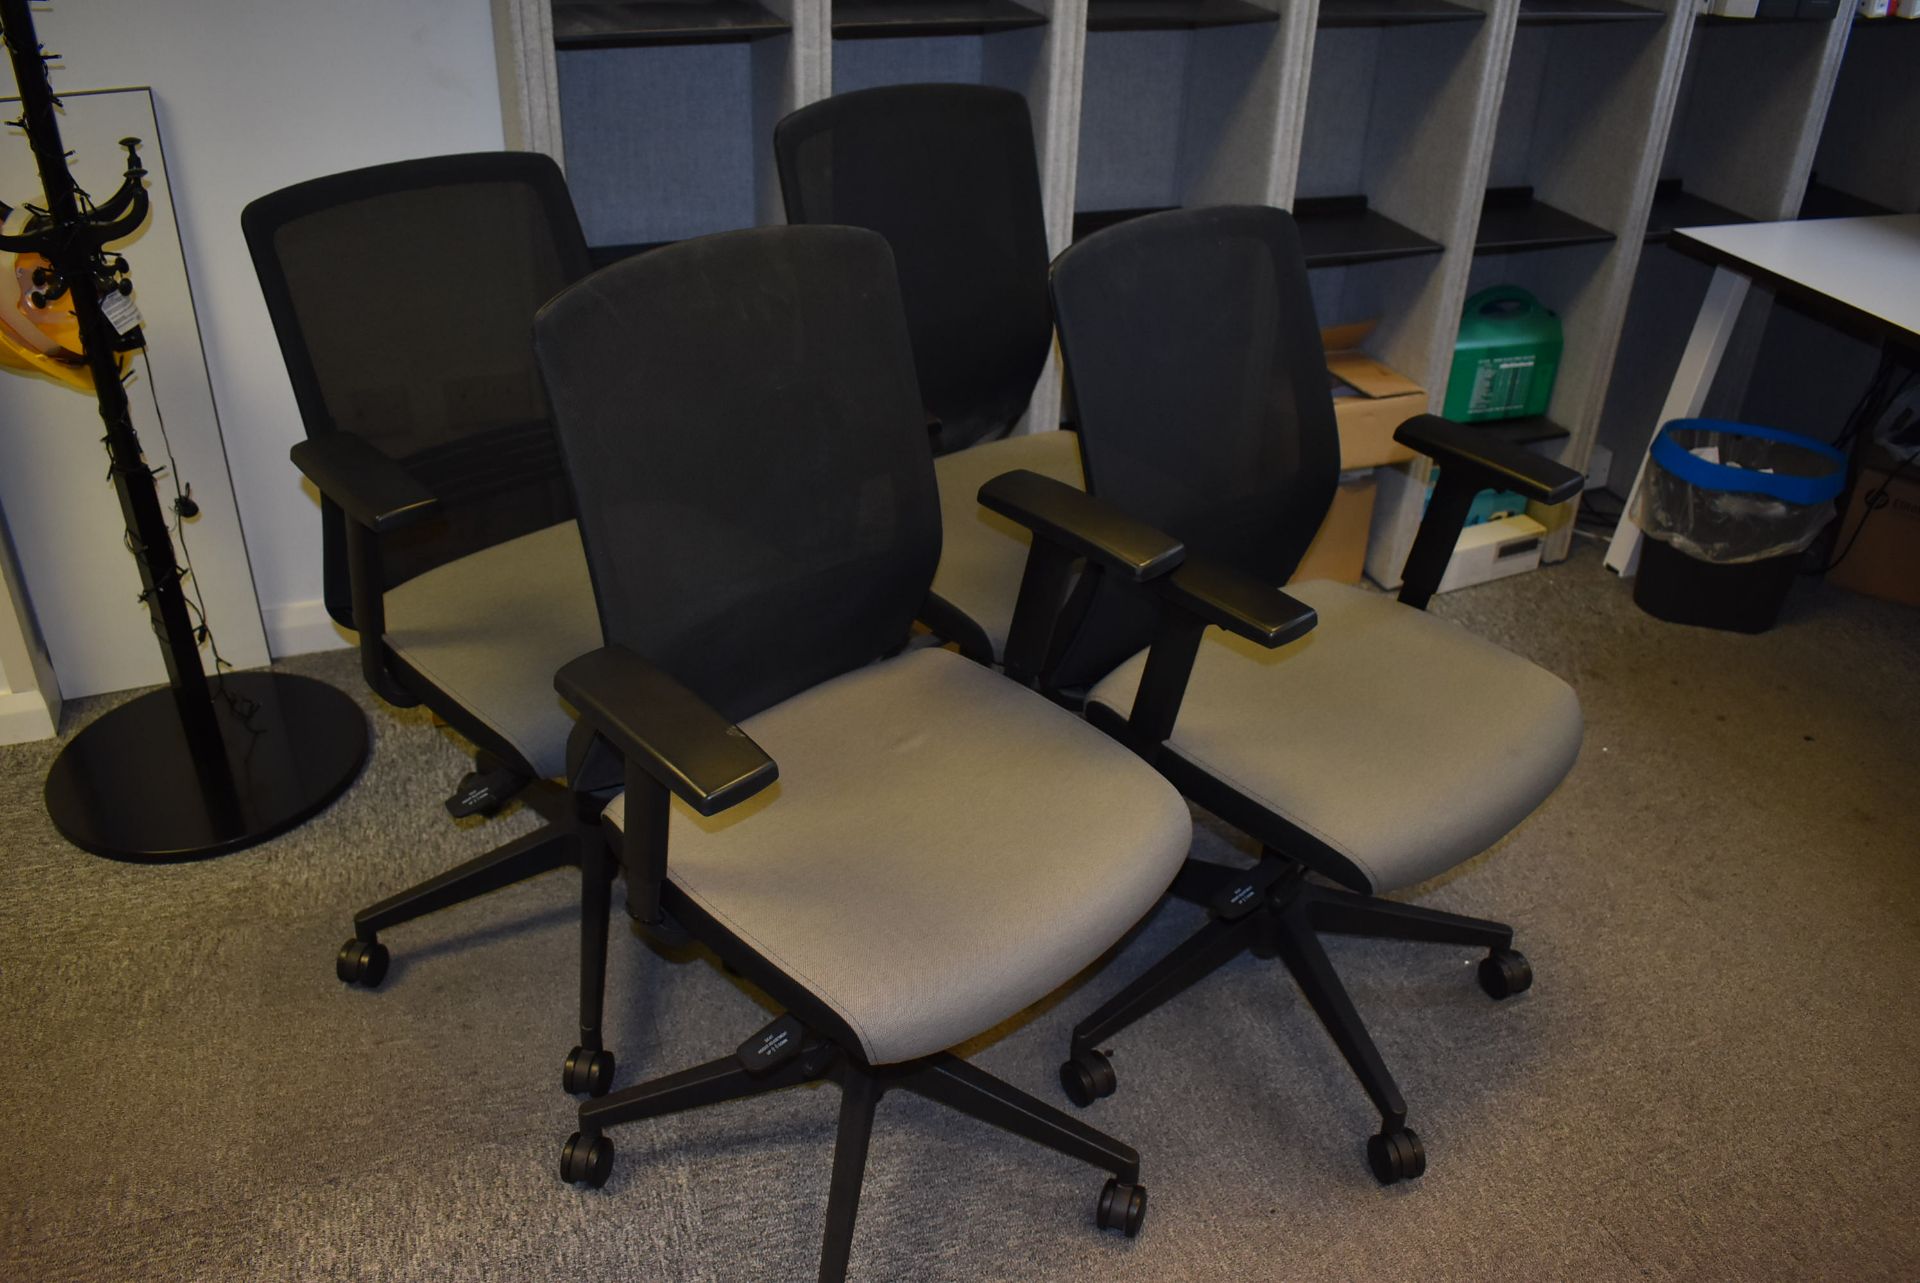 *Four Swivel Office Chairs